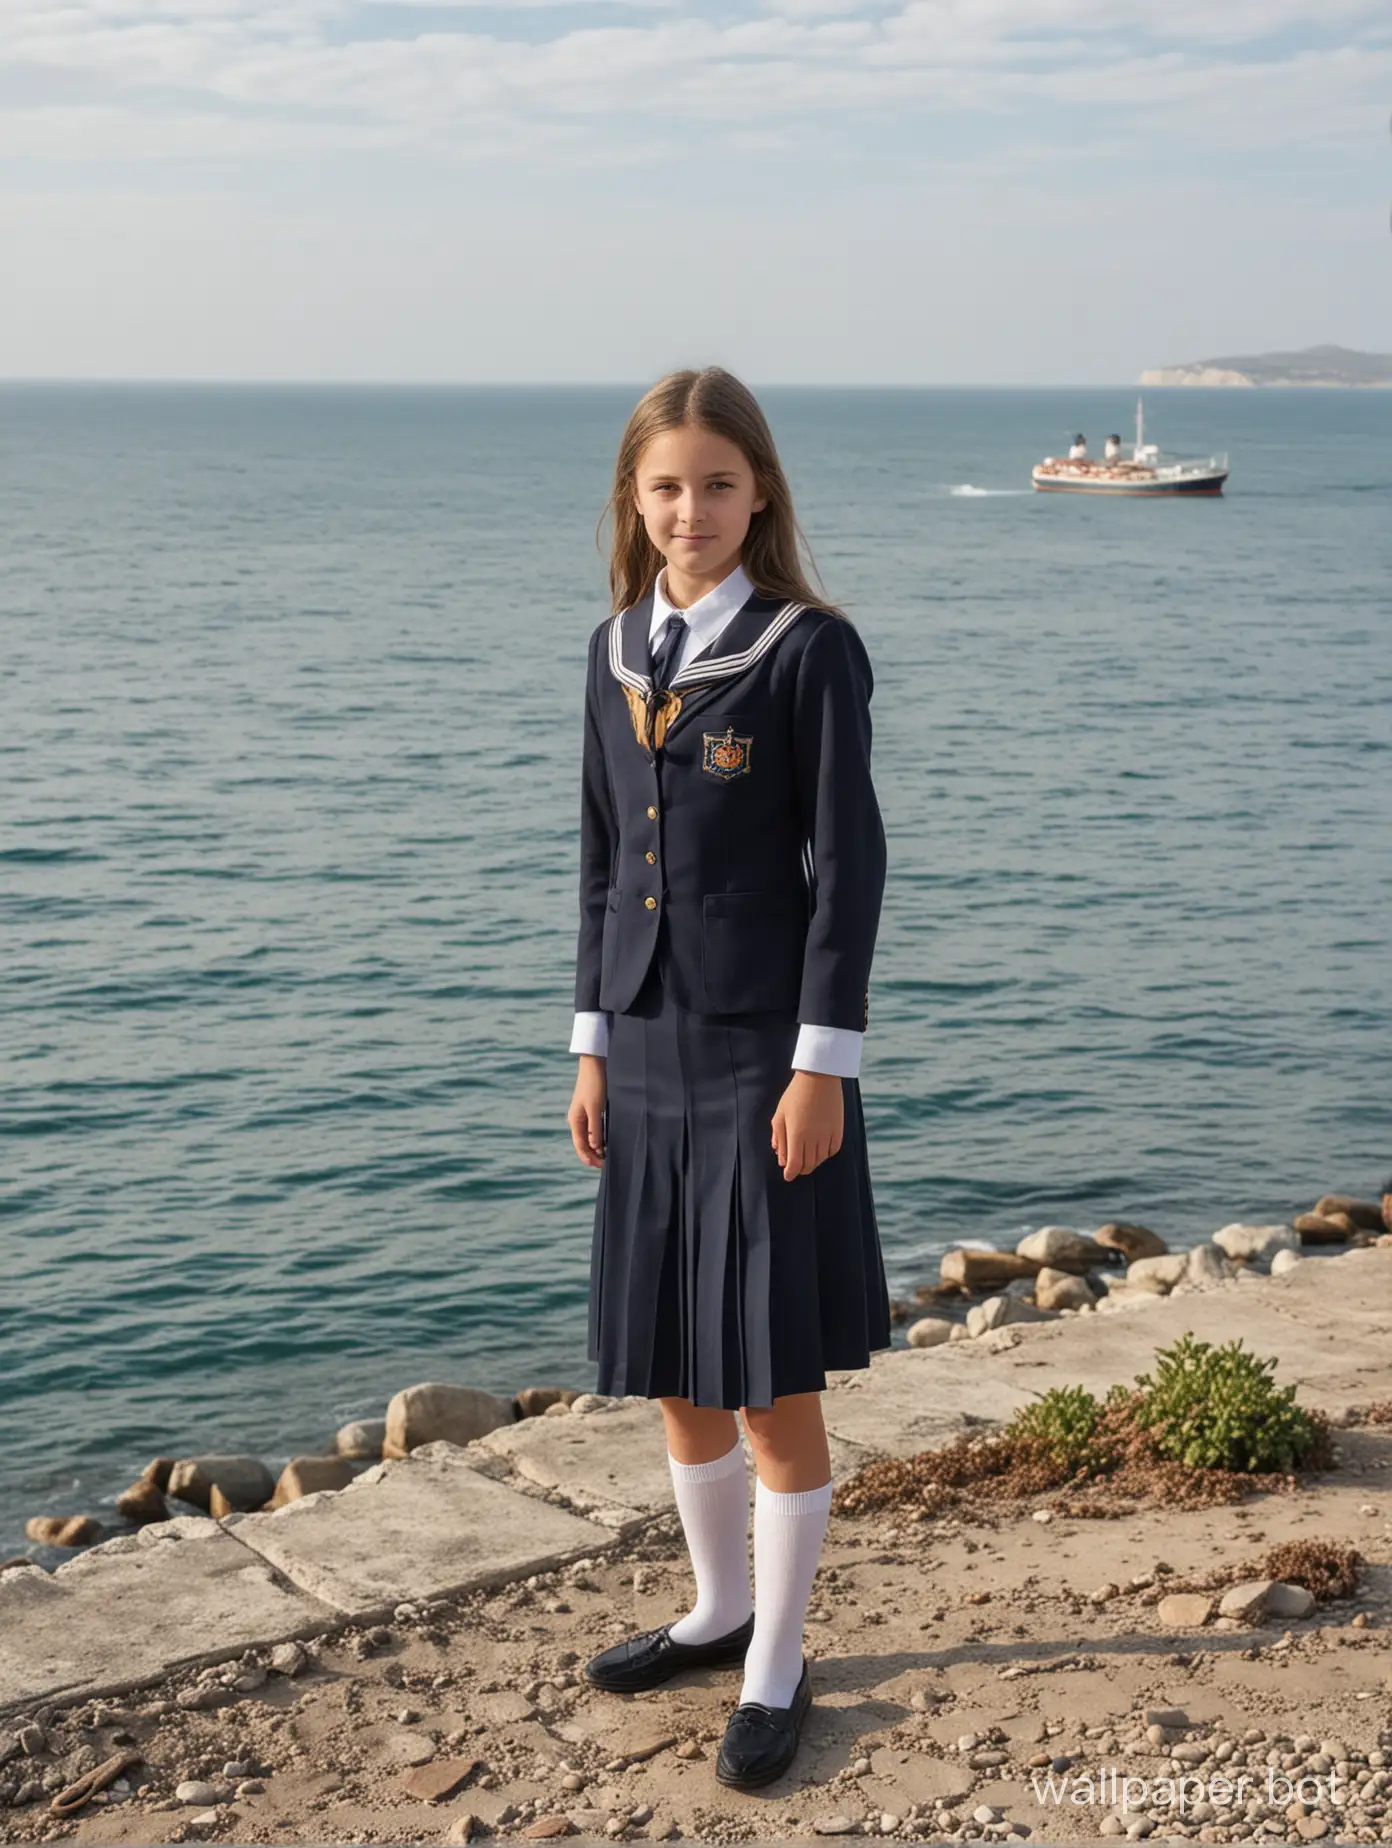 11-year-old girl, Crimea, in full growth, school uniform, view of the sea, ship in the distance